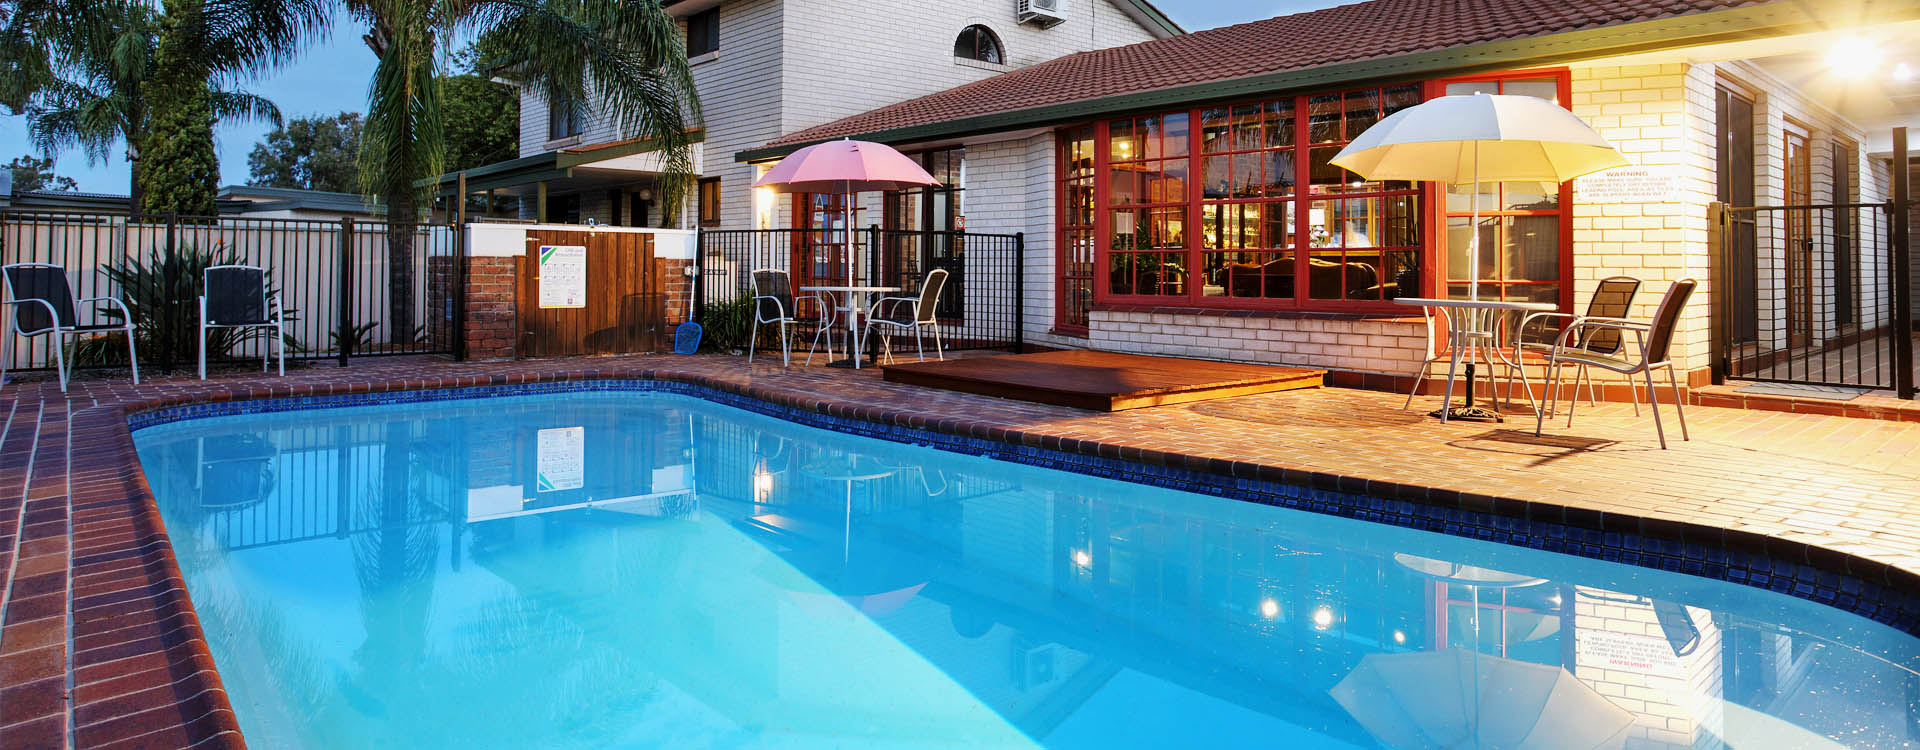 Relax by the pool at Tamworth Motor Inn & Cabins.